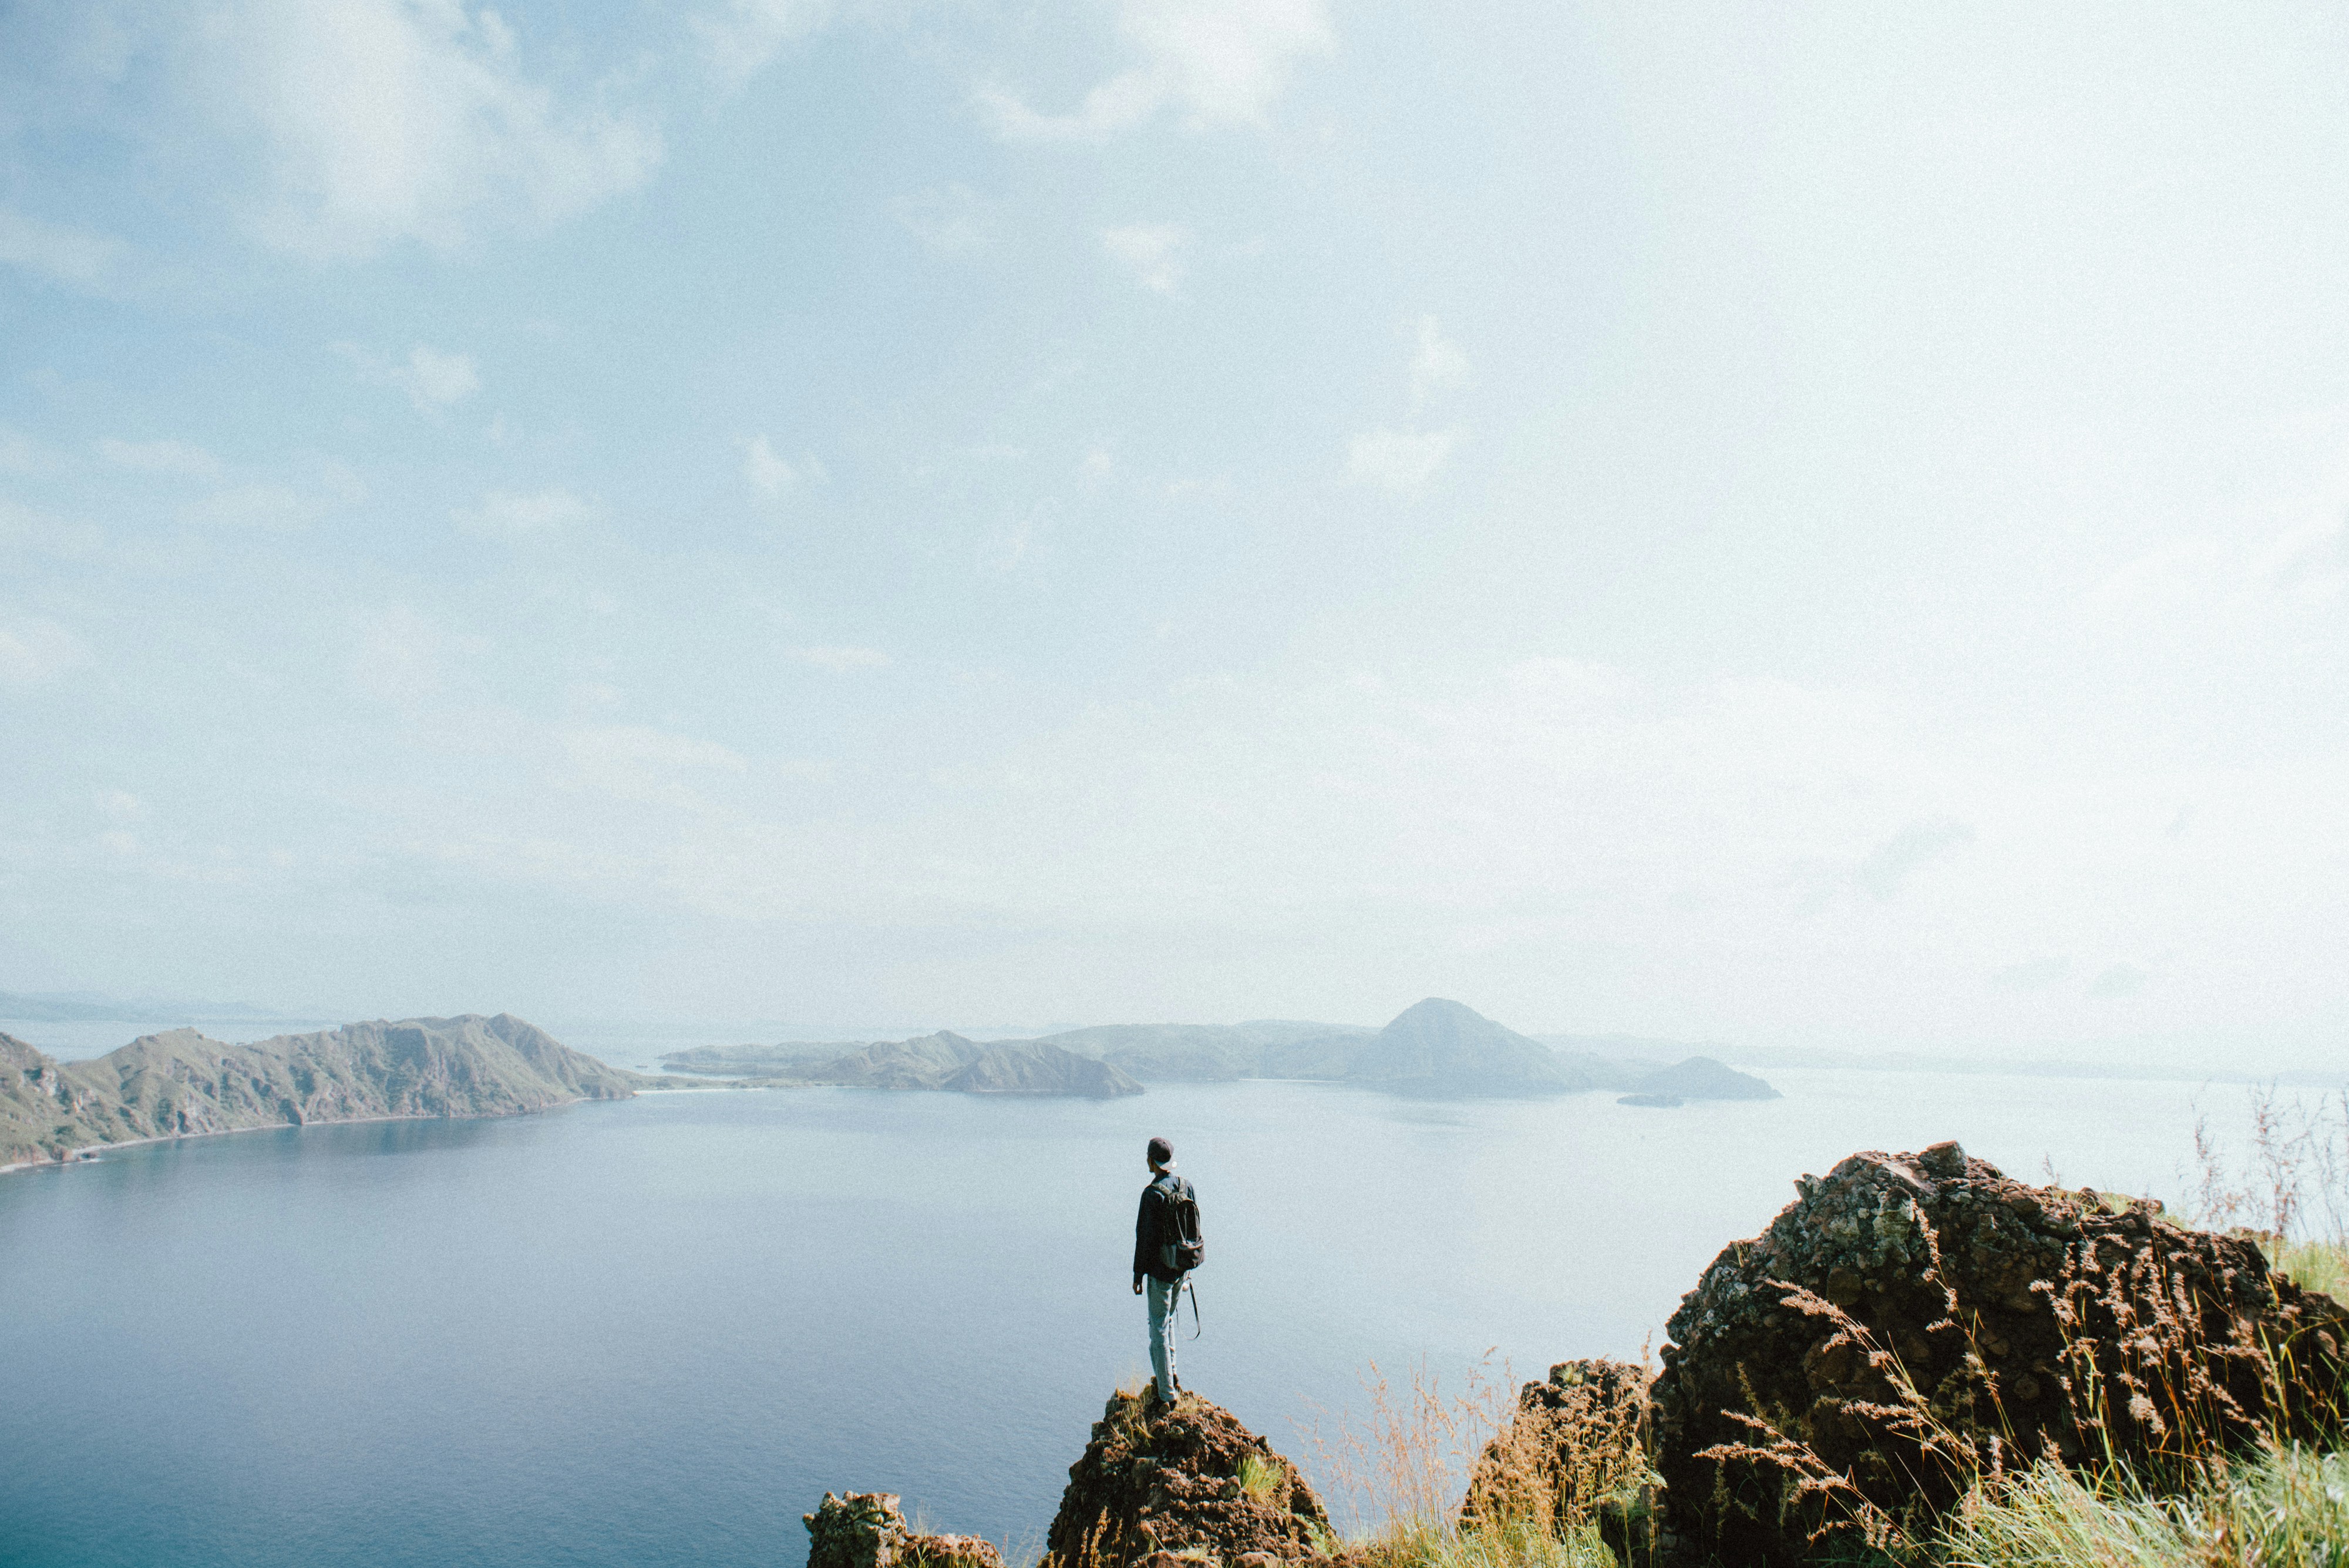 My friend Adit is mountain conqueror, so it was so easy to be at the top of Padar Island’s summit. Standing at the edge like no one care about. To see all the beauty from bird eyes angle.